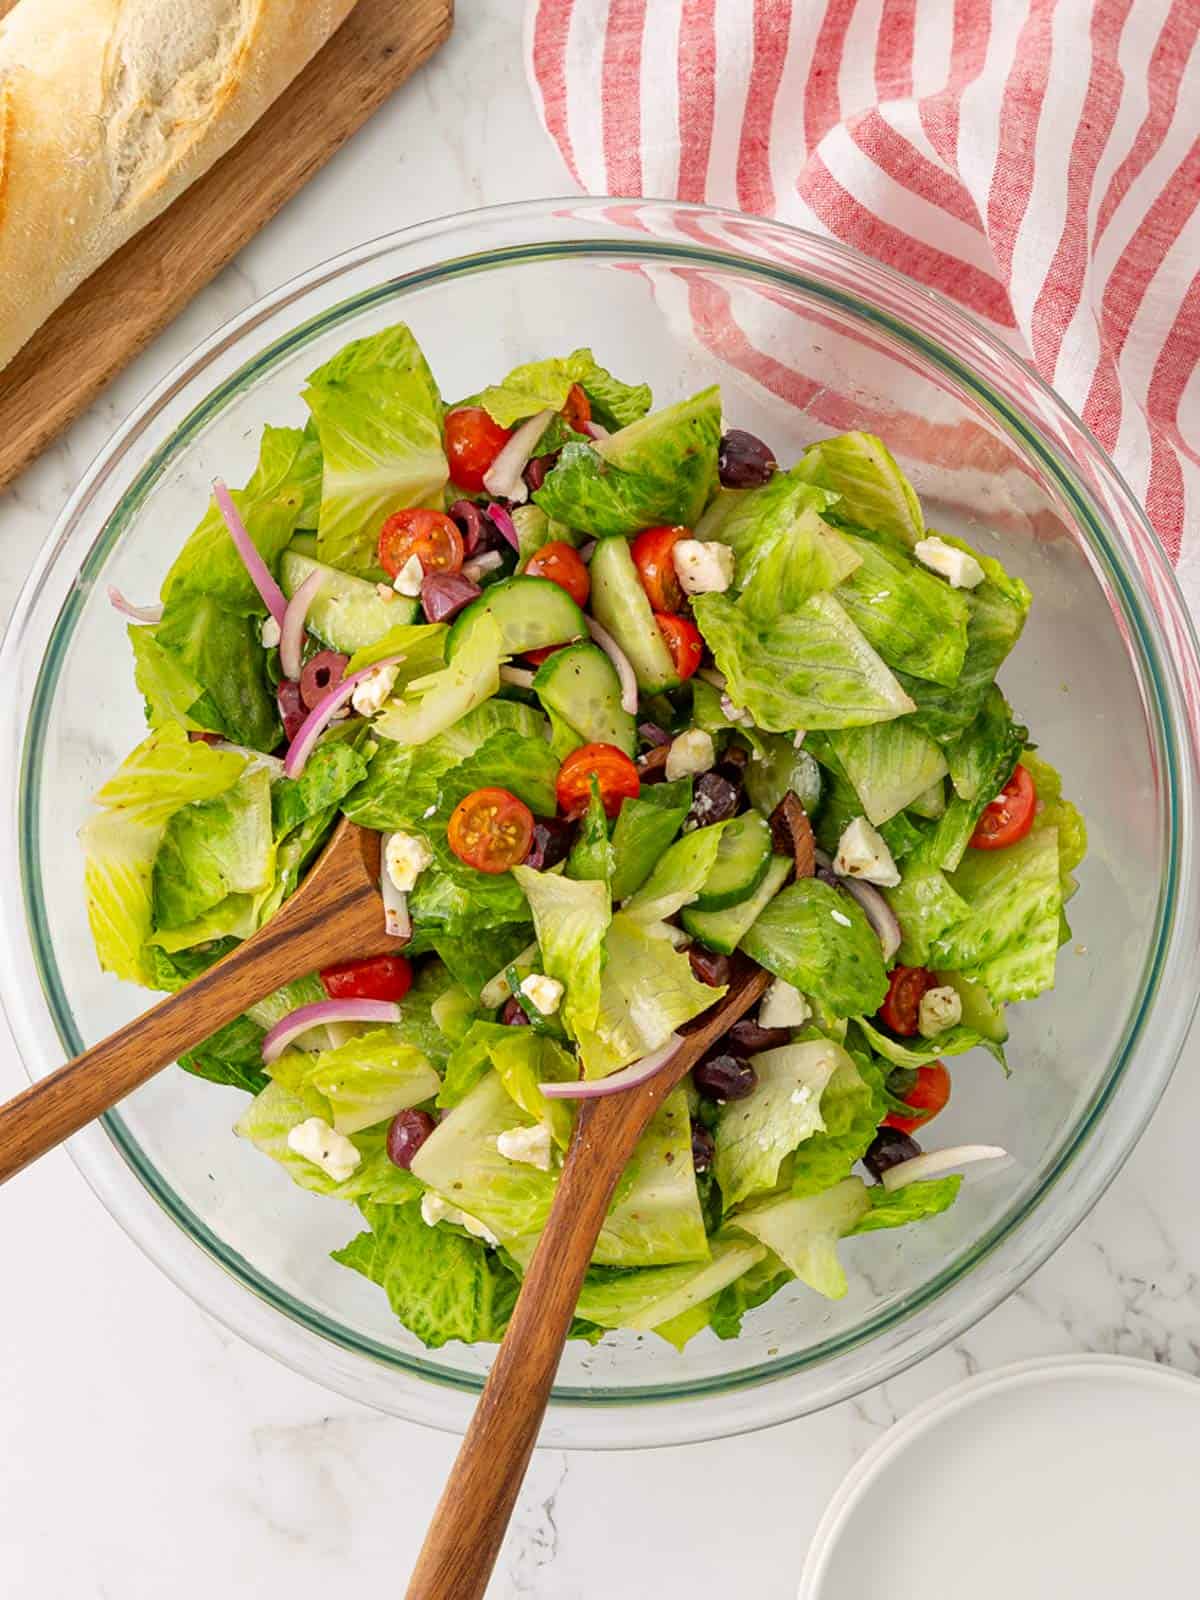 A Mediterranean salad is tossed with dressing in a glass bowl.